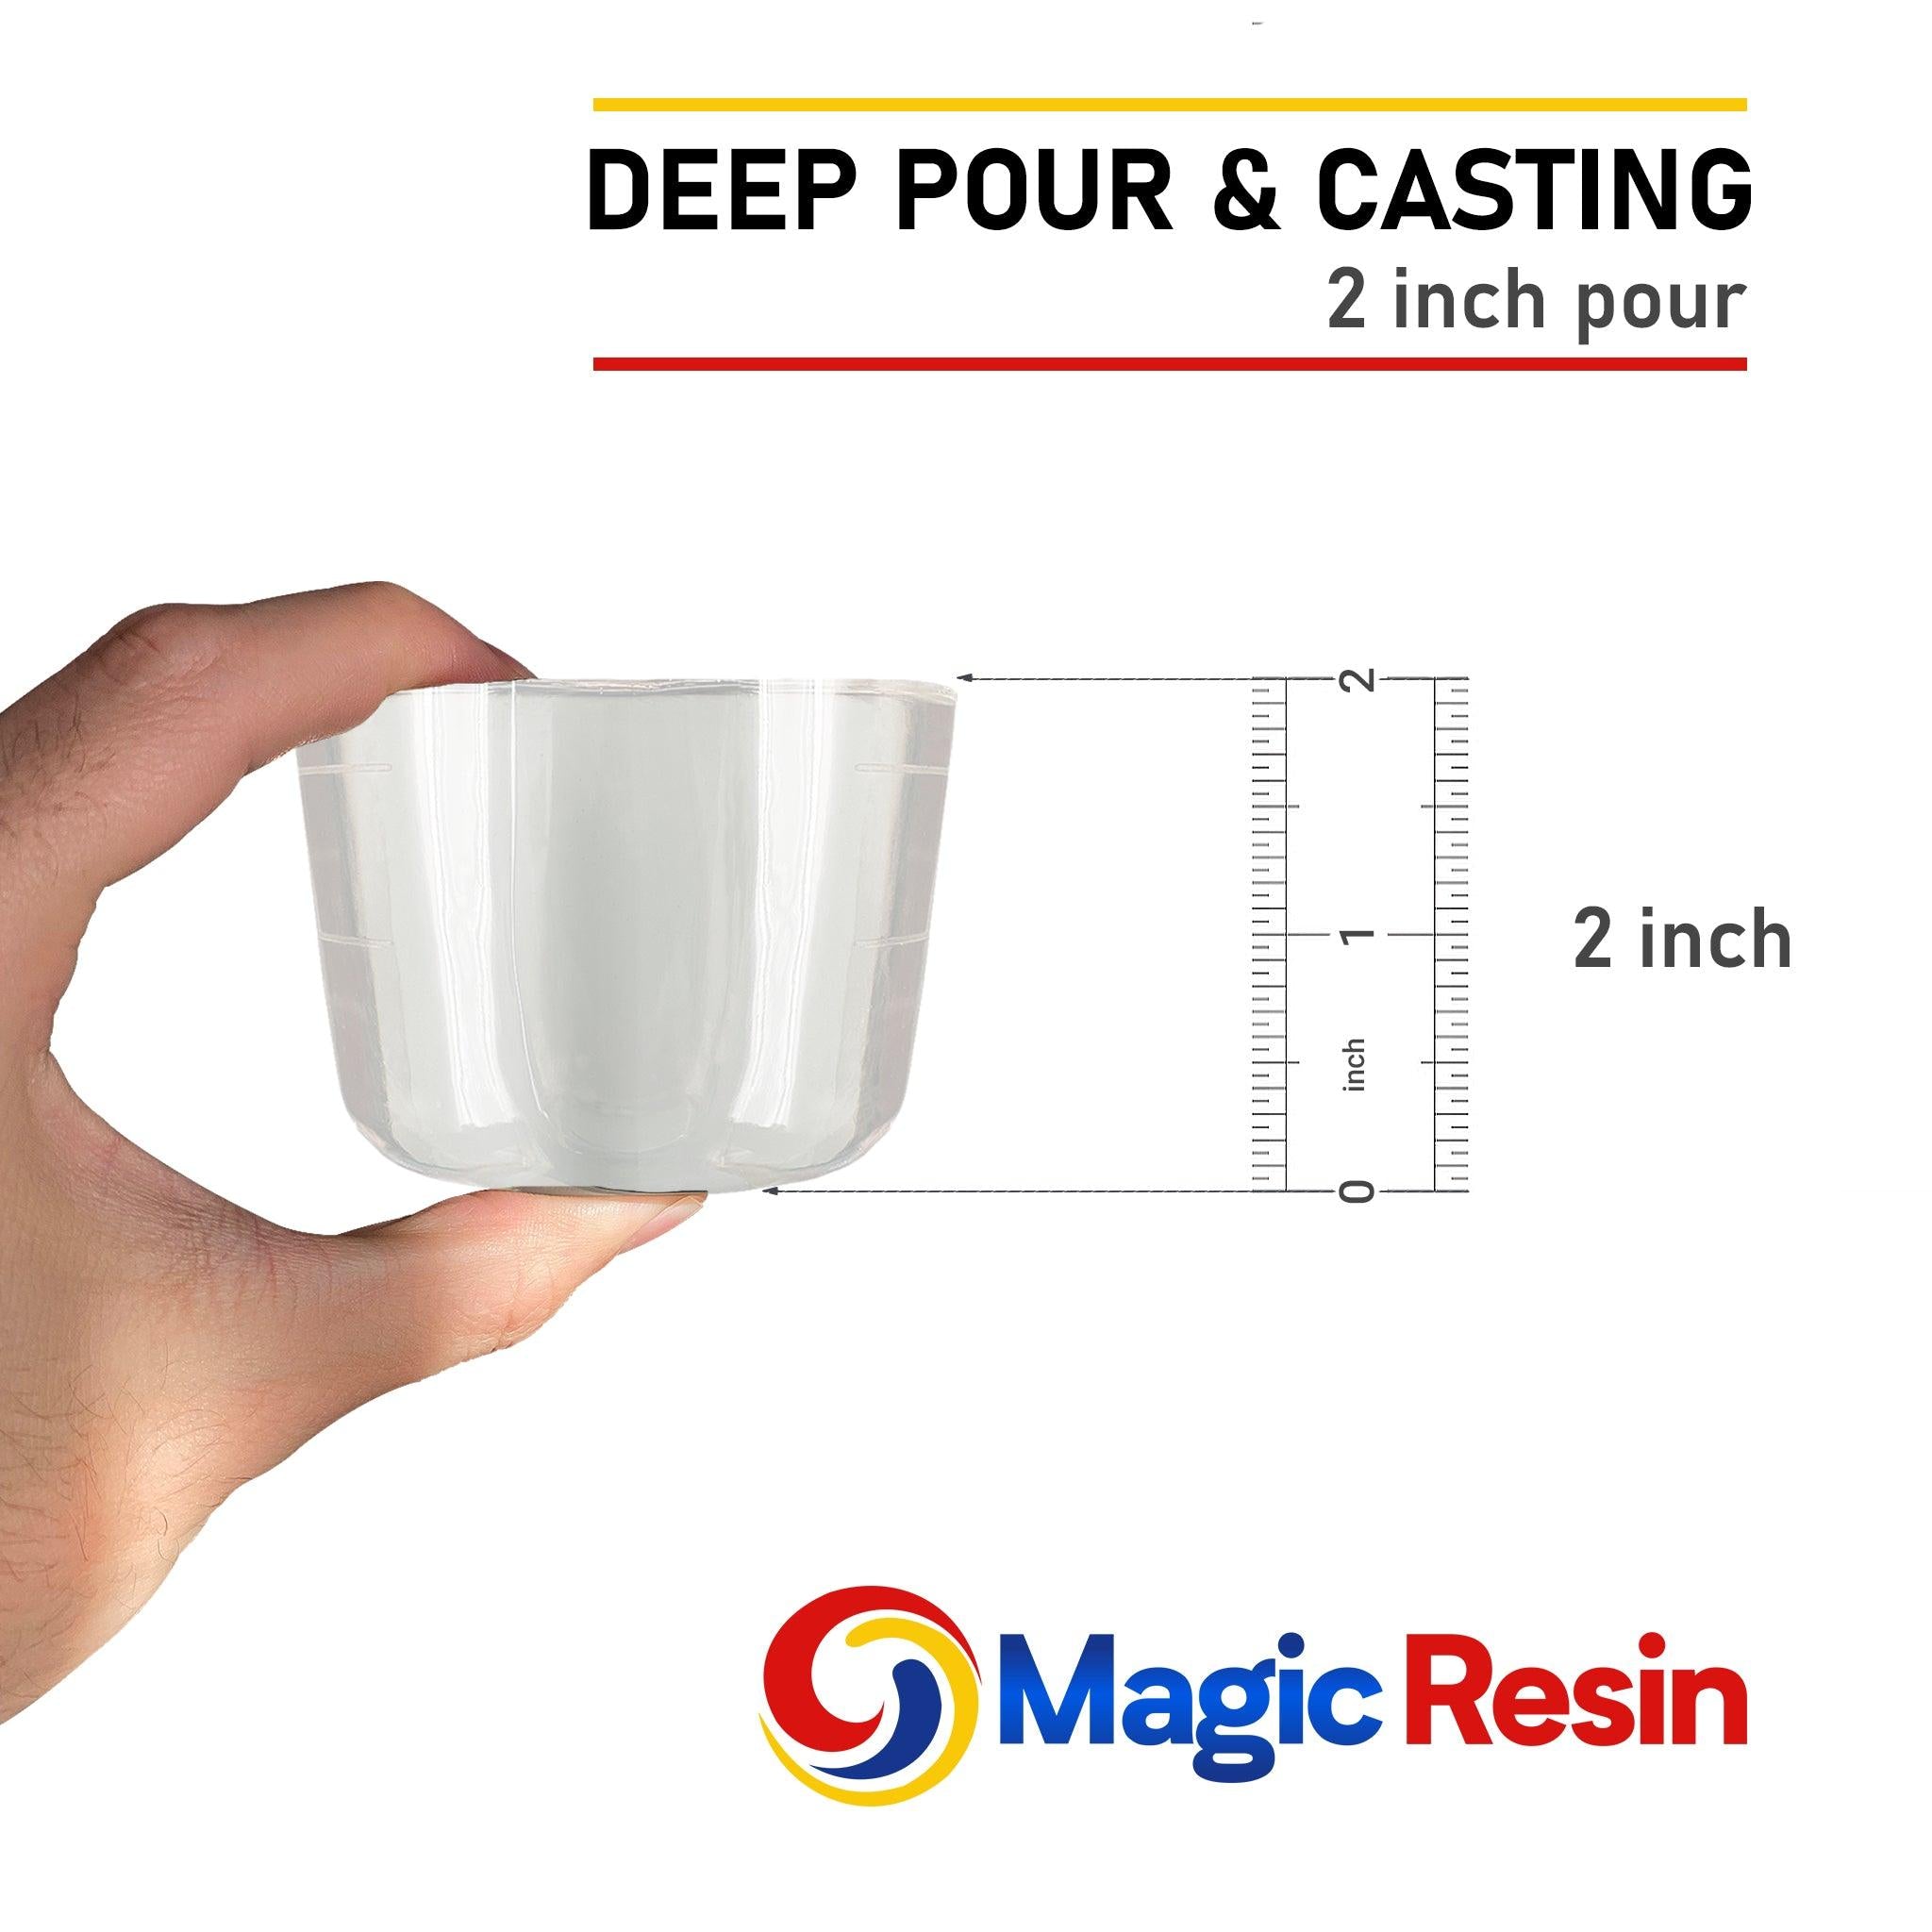 Deep Pour Epoxy Resin for Epoxy River Tables, Casting Molds, Live Edge Slab Tables & Countertops - Pour Crystal Clear Epoxy 2-3 Deep per Layer (3 Gal